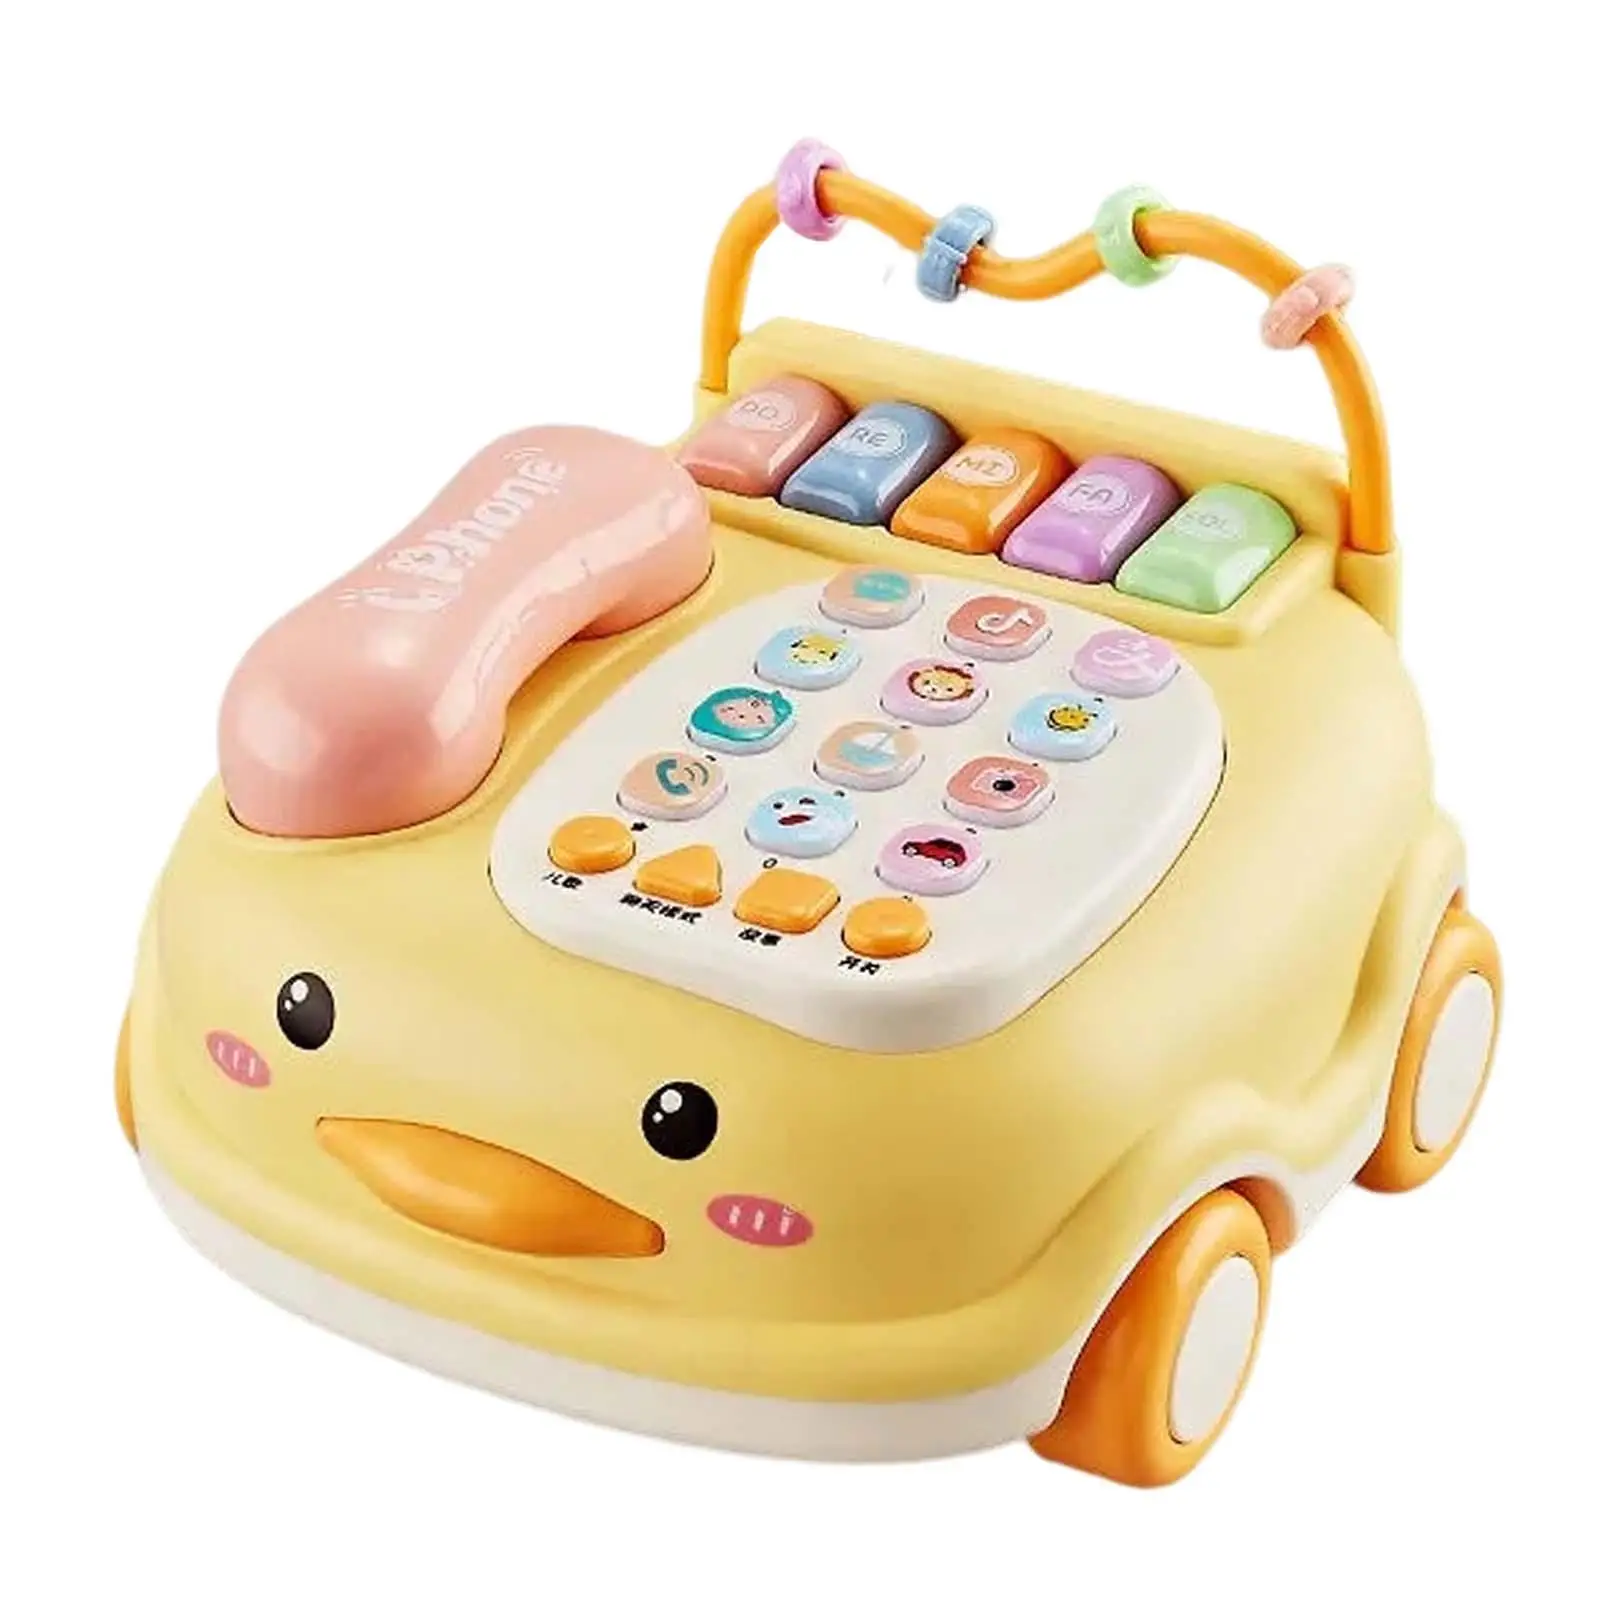 Cognitive Development Toy Lights Sensory Toy Pretend Phone Baby Toy Phone for 3 Years Old Preschool Educational Learning Boy